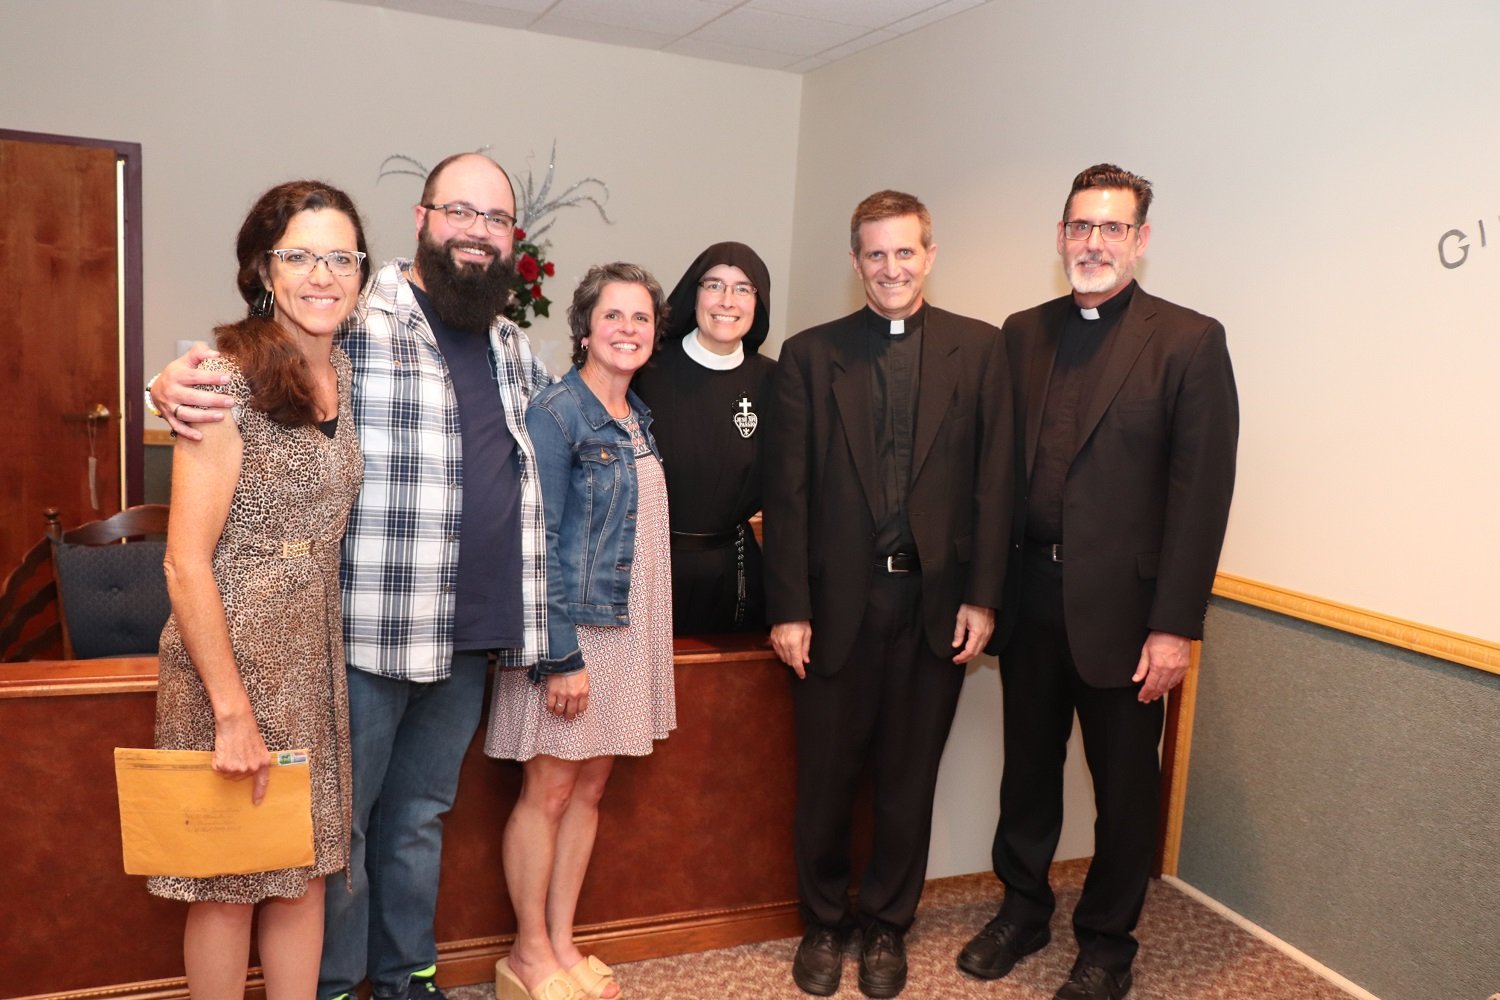  A NET alumni reunion — Mother reconnects with friends from her time with NET Ministries in the early 90s.  L-R: Charlotte Patros, Gerard Scheet, Melanie Pfeil, Mother John Mary, Fr. Aaron Brodeski, Msgr Paul Hudock 